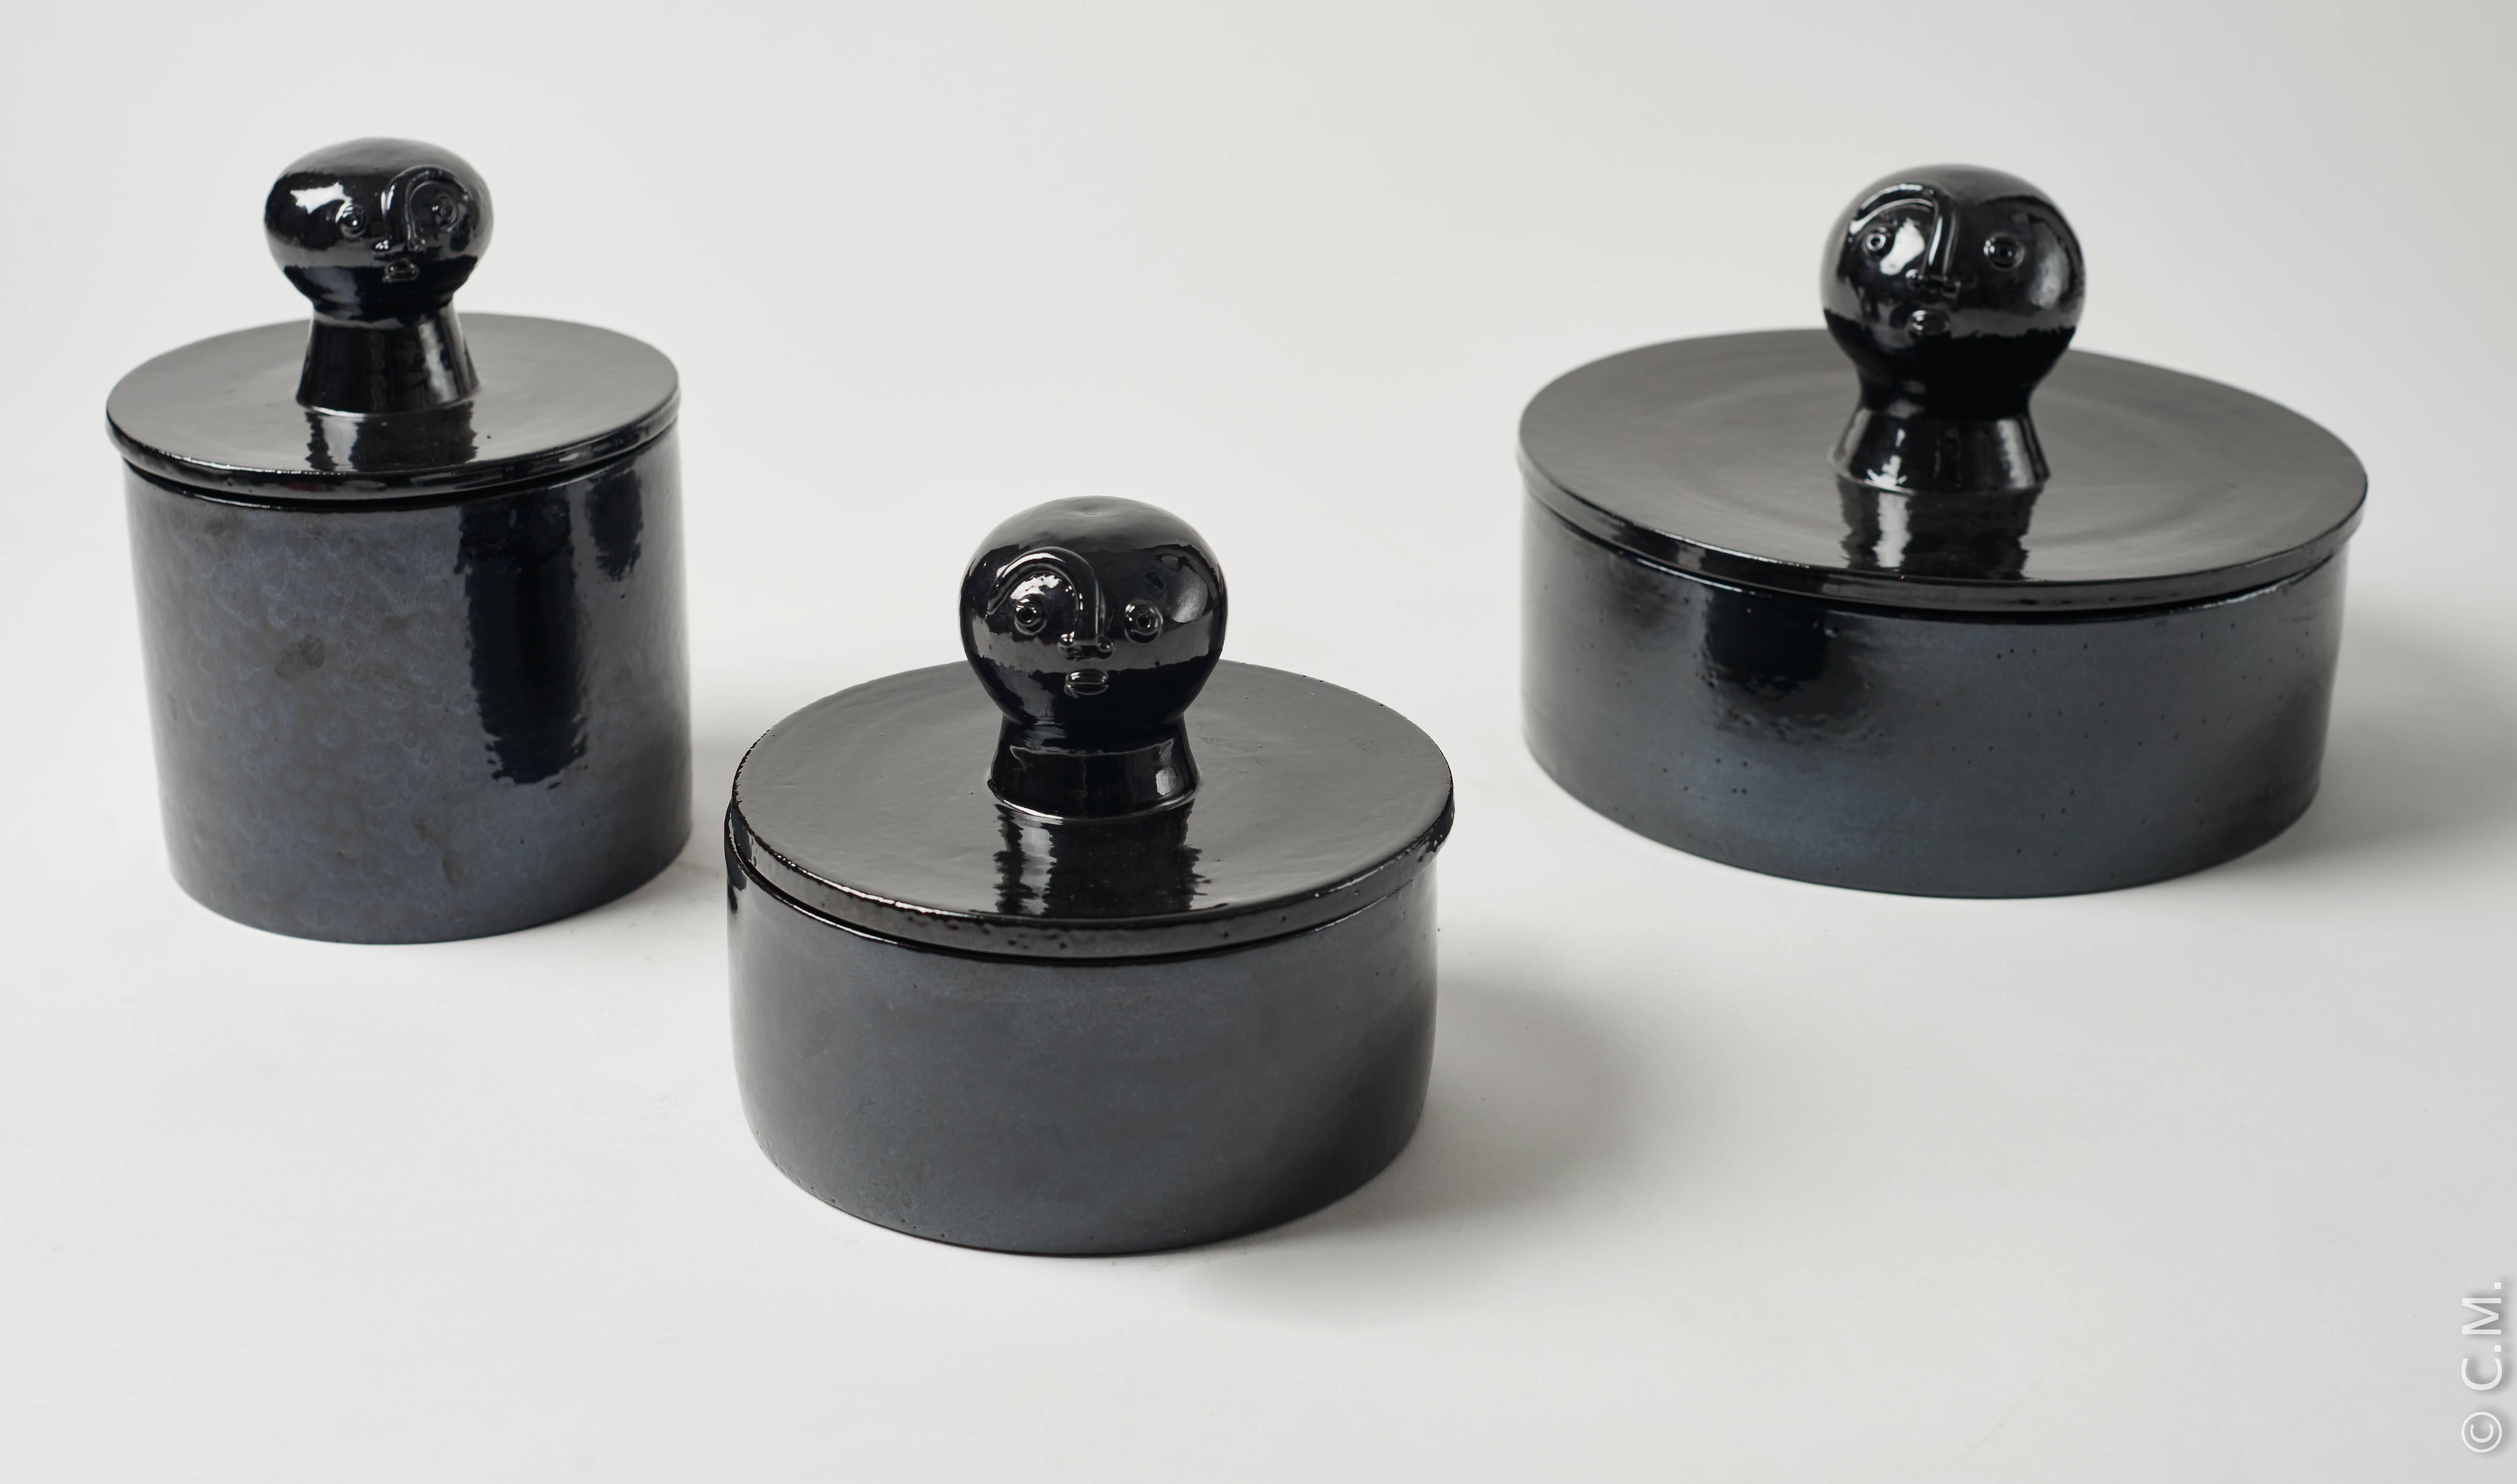 Set of three shiny black enameled ceramic boxes
top with round faces
One of a kind 2017 by French ceramists Dalo

All Dalo's creation are unique pieces entirely designed and made with four hands in their workshop.

Dimensions: H 15/18/20, L